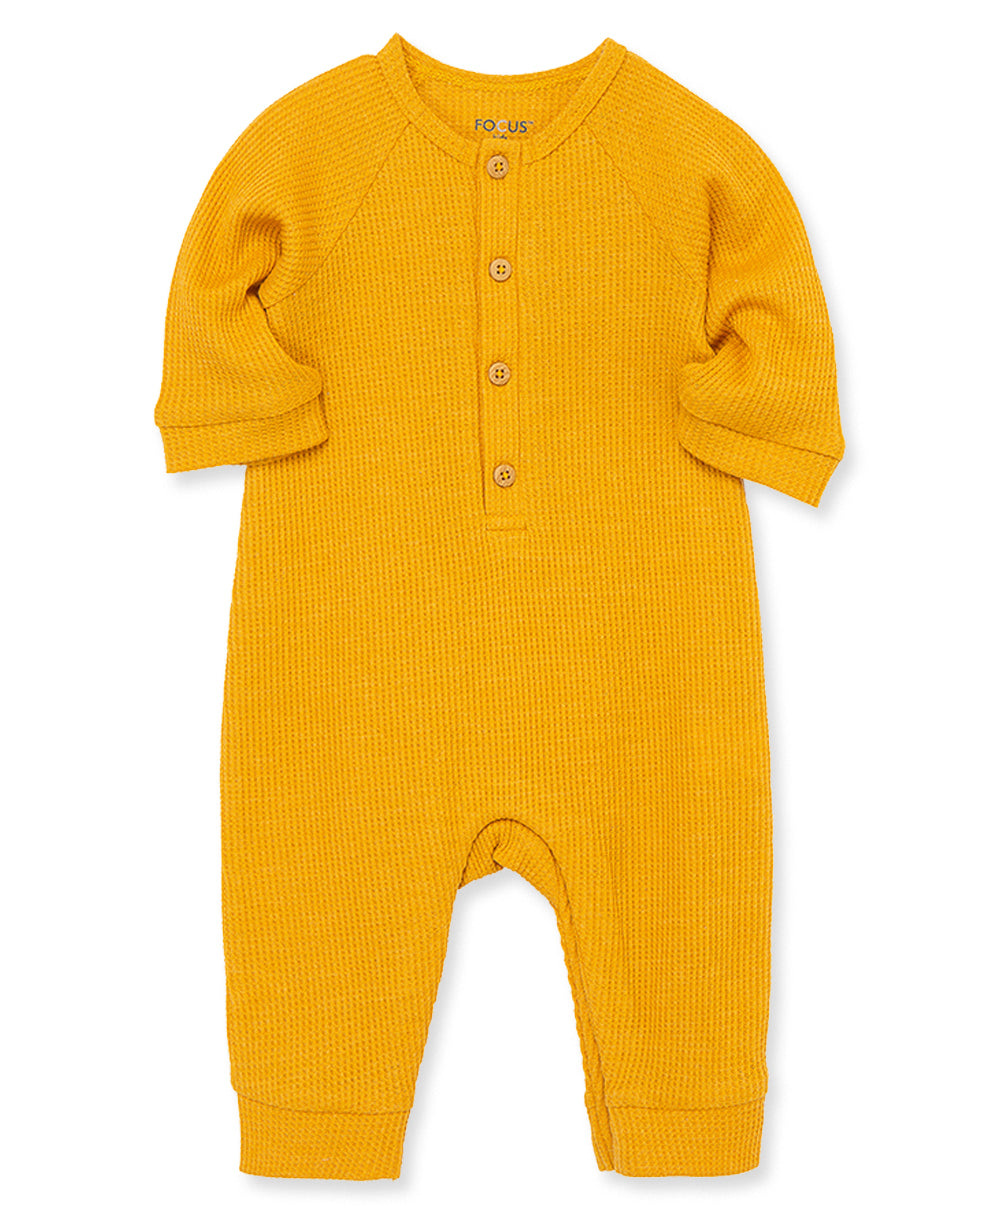 Focus Kids Coverall (12M-24M) - Little Me